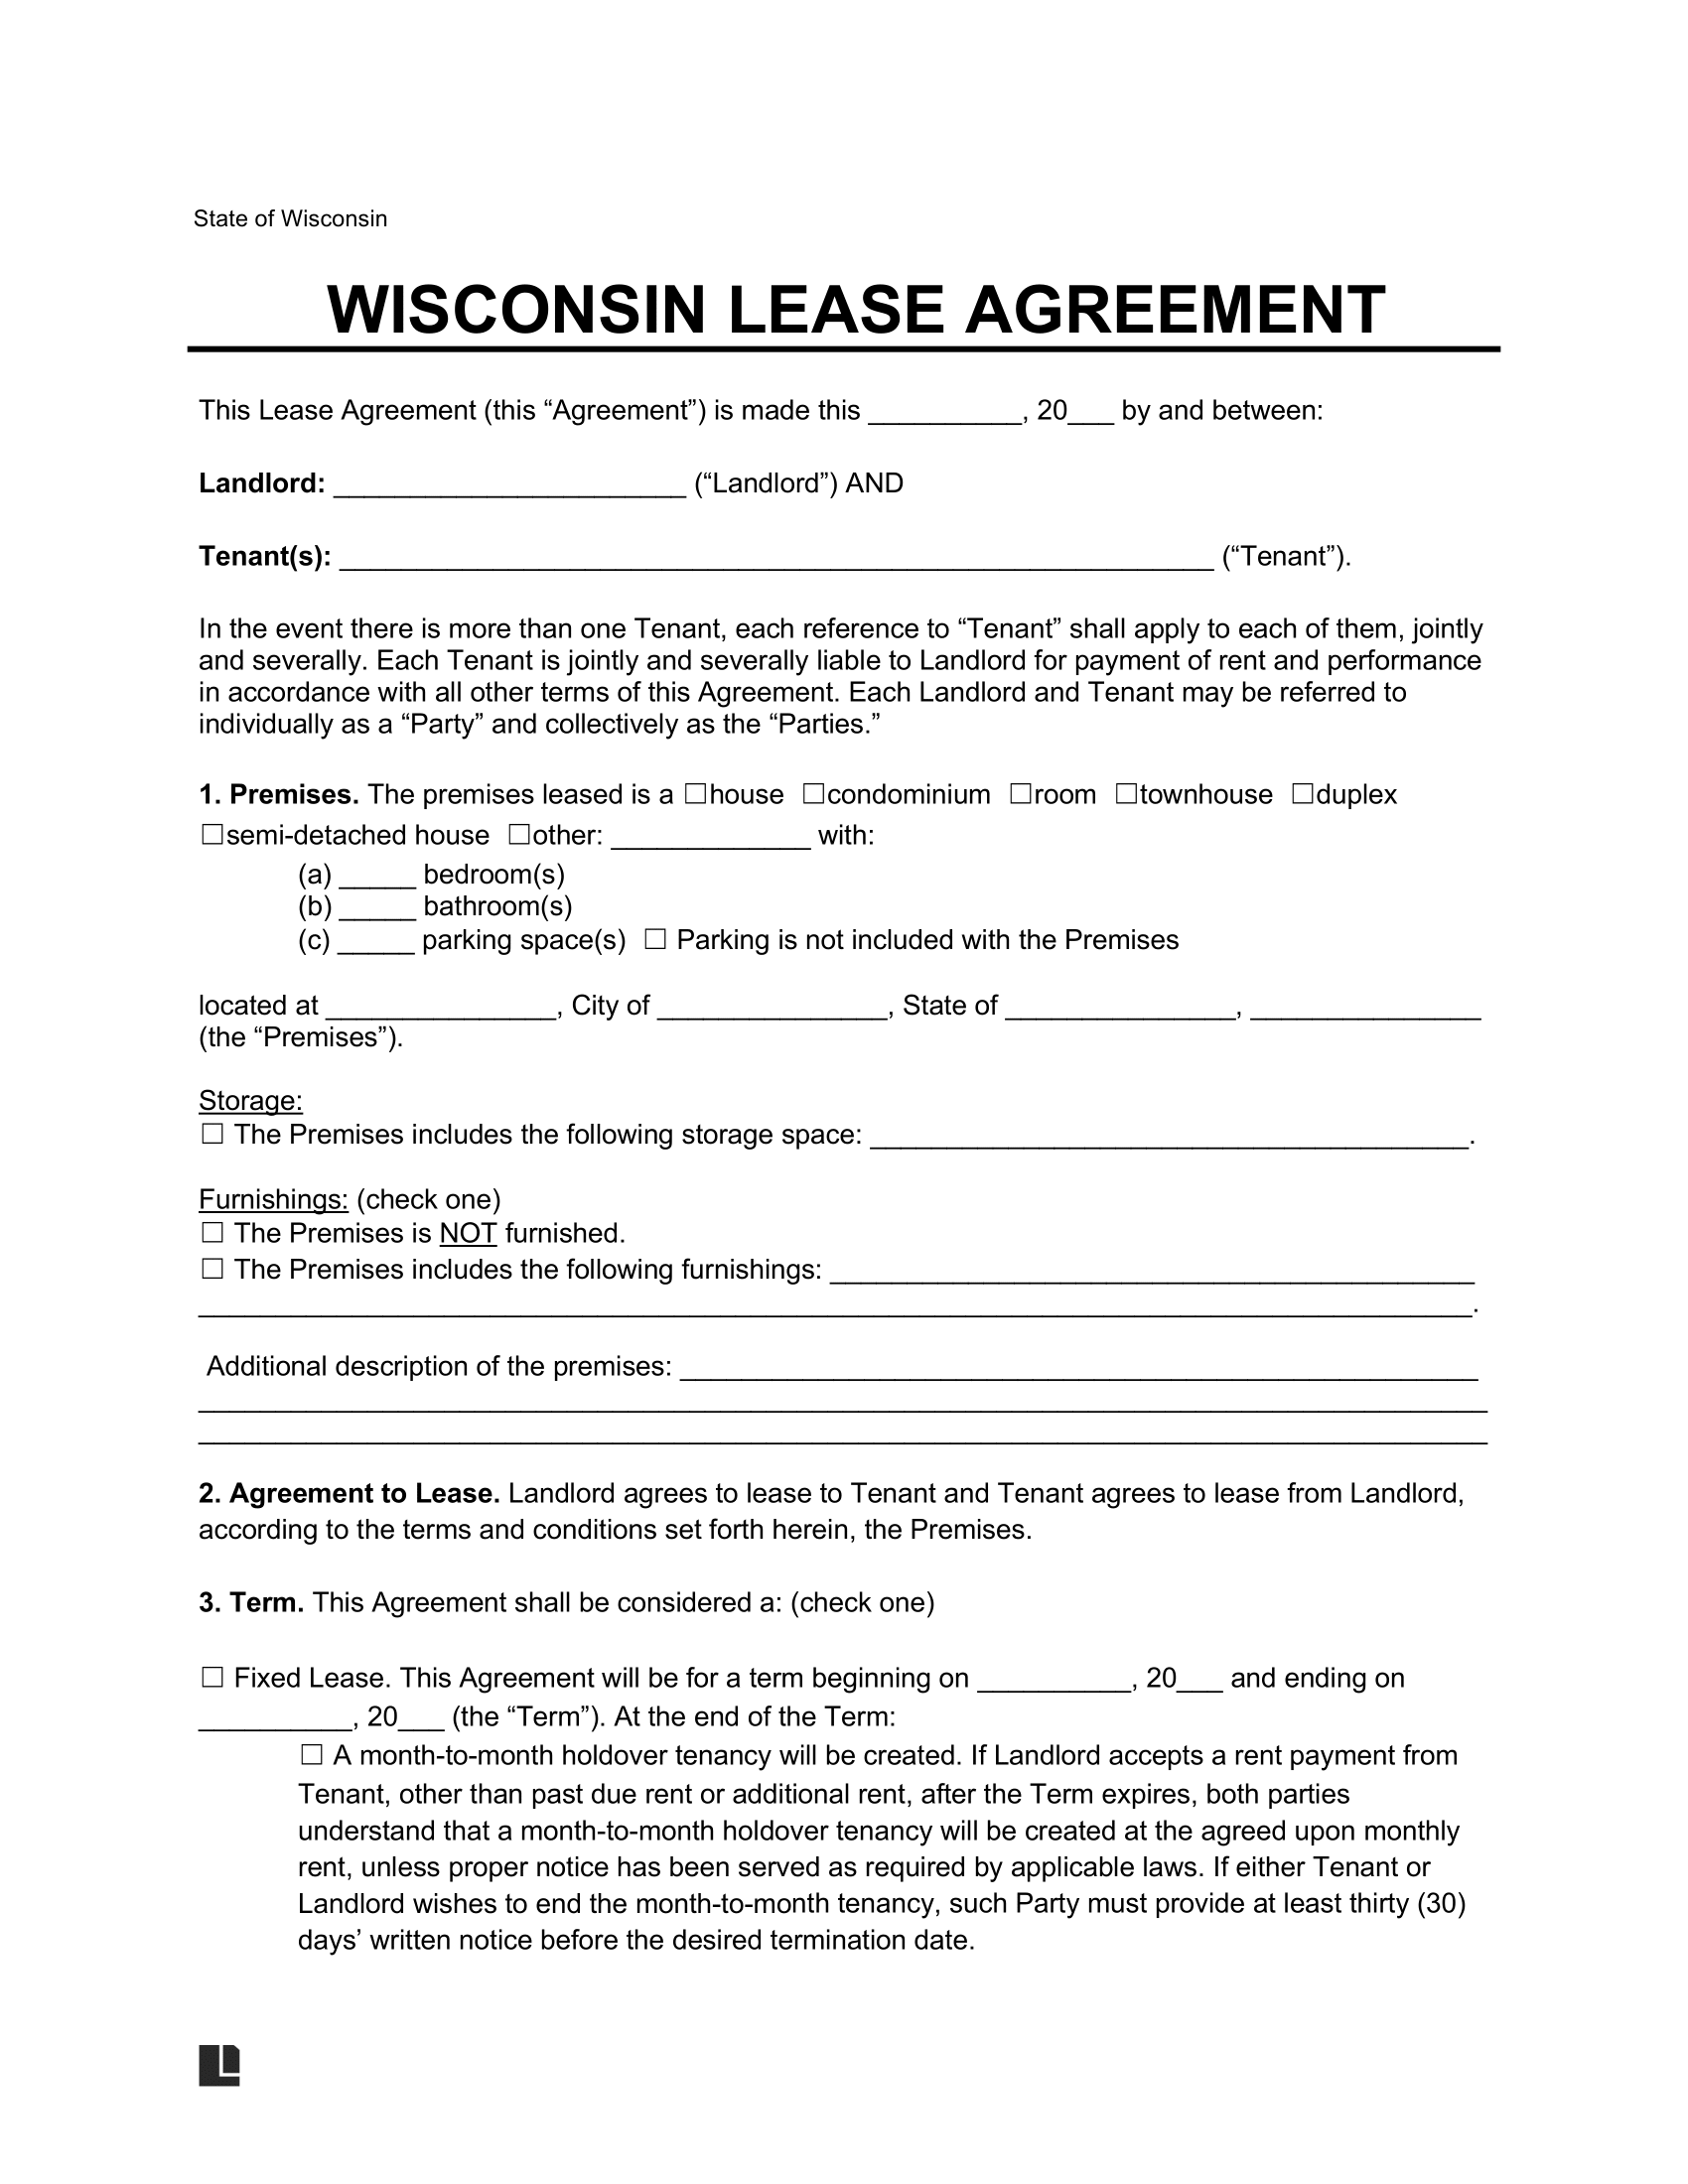 Wisconsin Standard Residential Lease Agreement